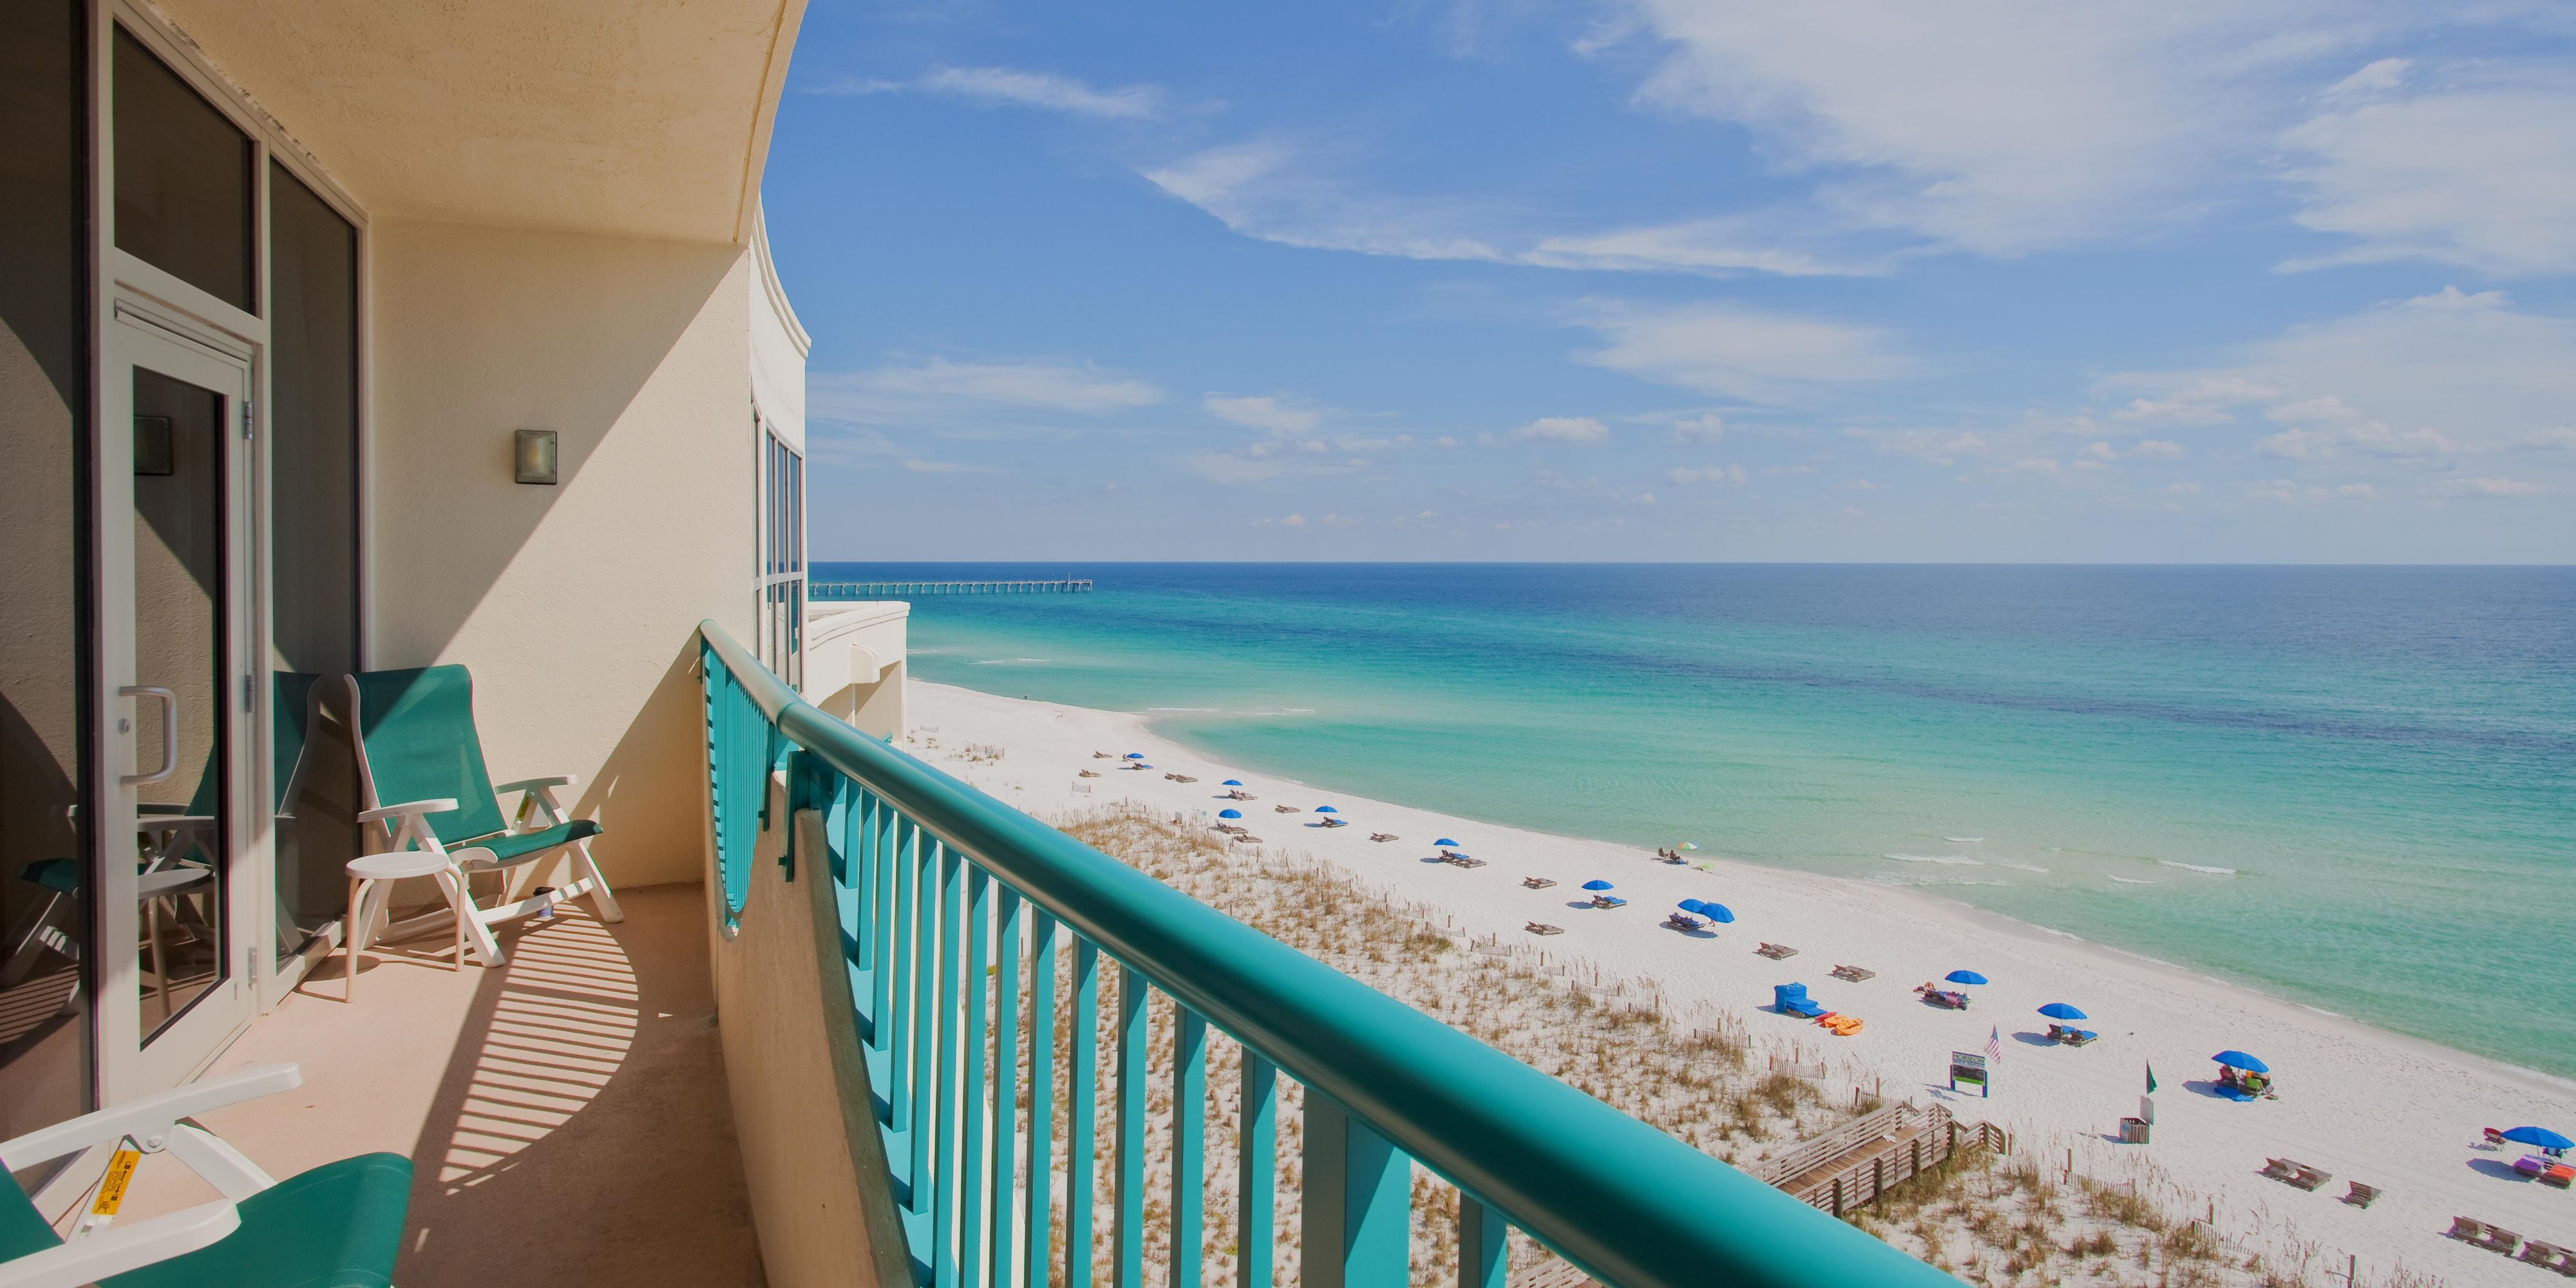 All of our rooms feature private balconies with direct Gulf views.